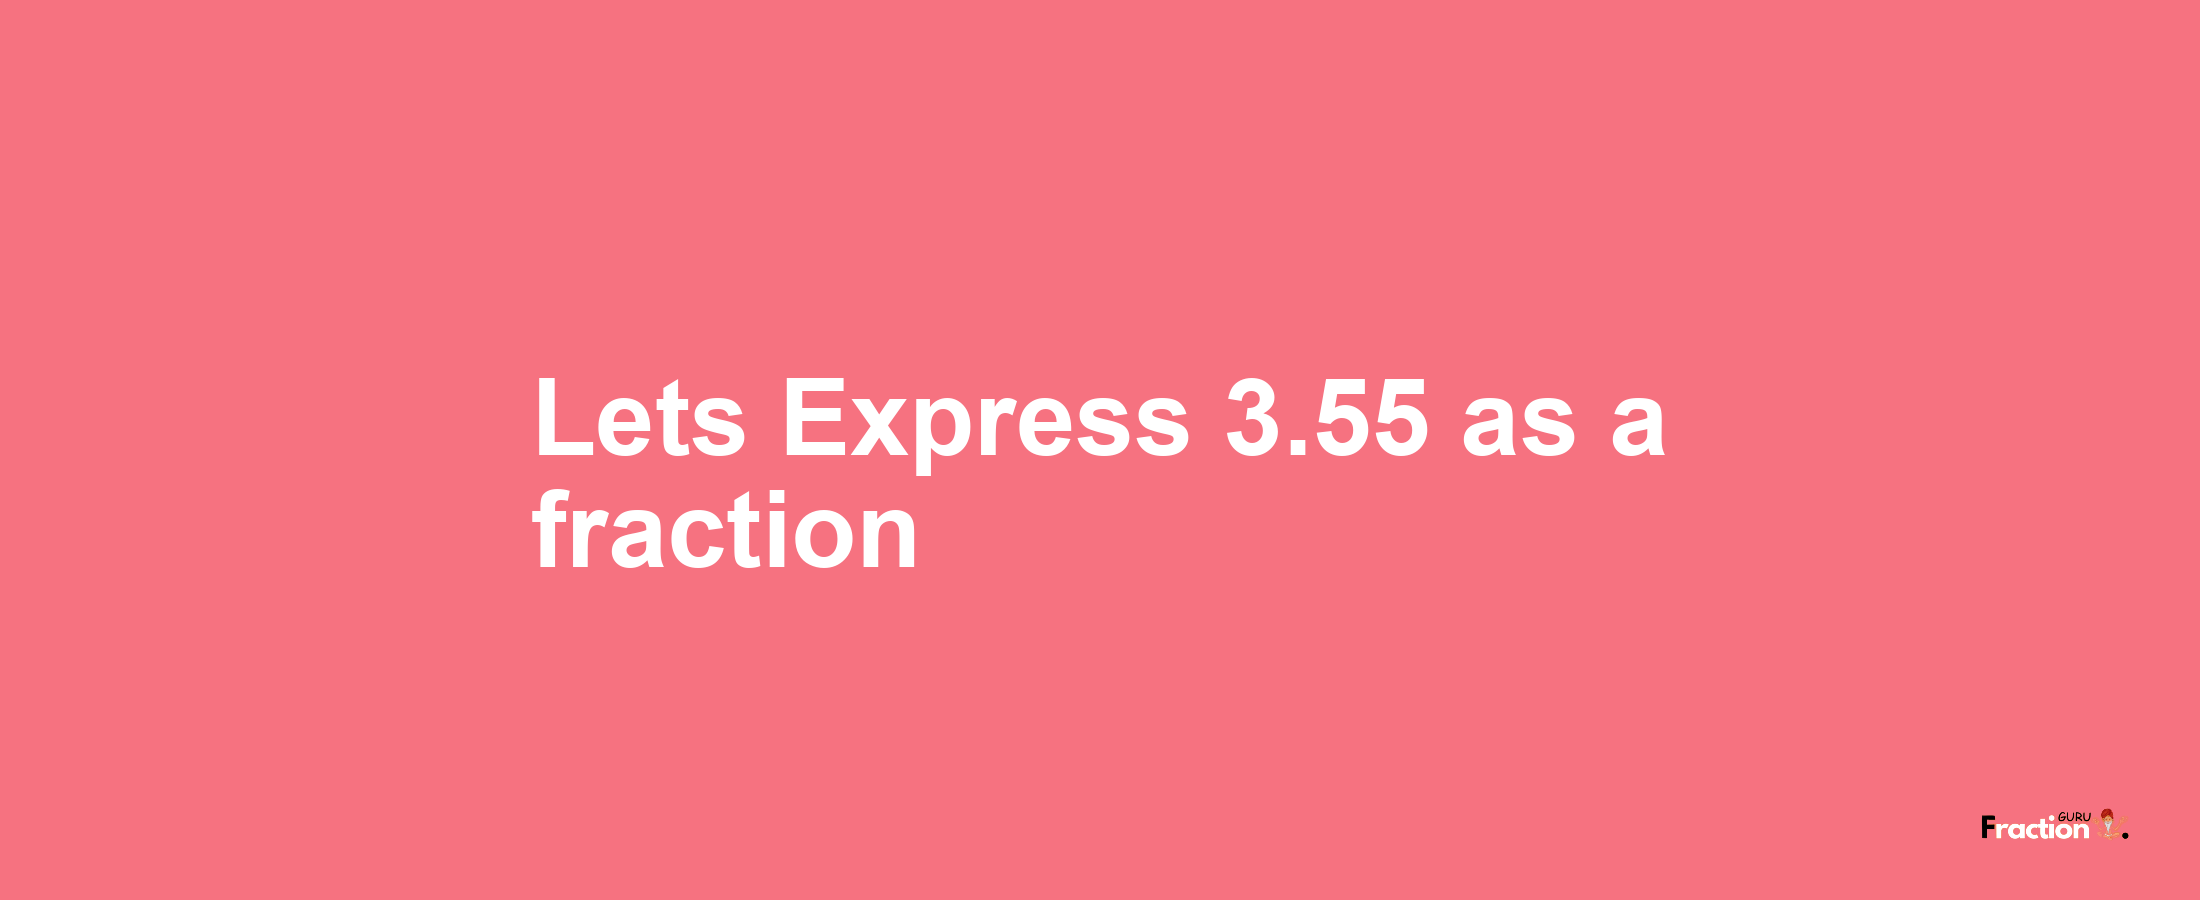 Lets Express 3.55 as afraction